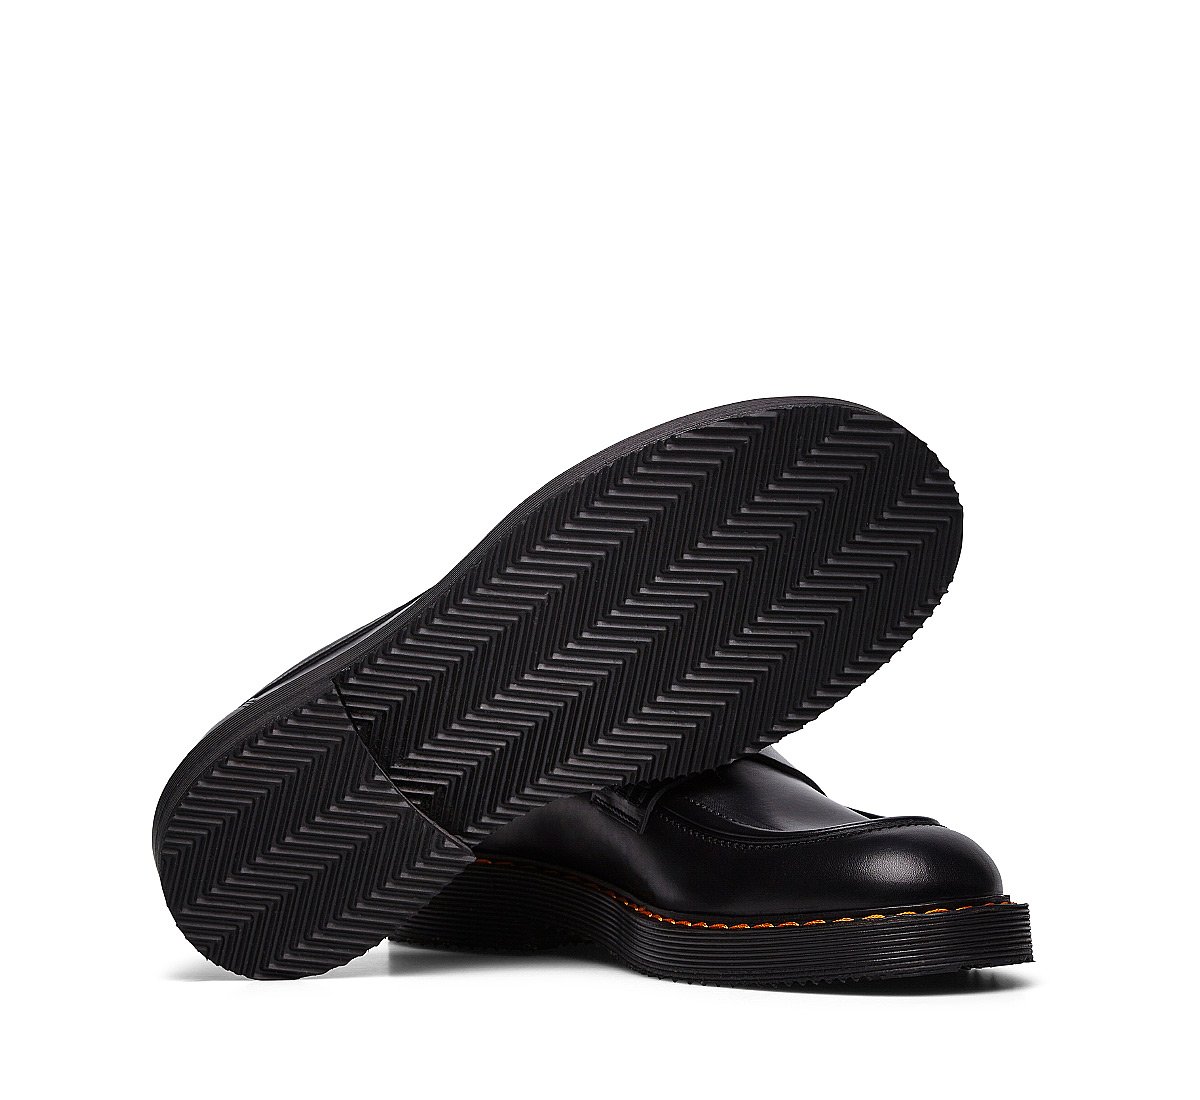 Barracuda classic moccasins in nappa leather